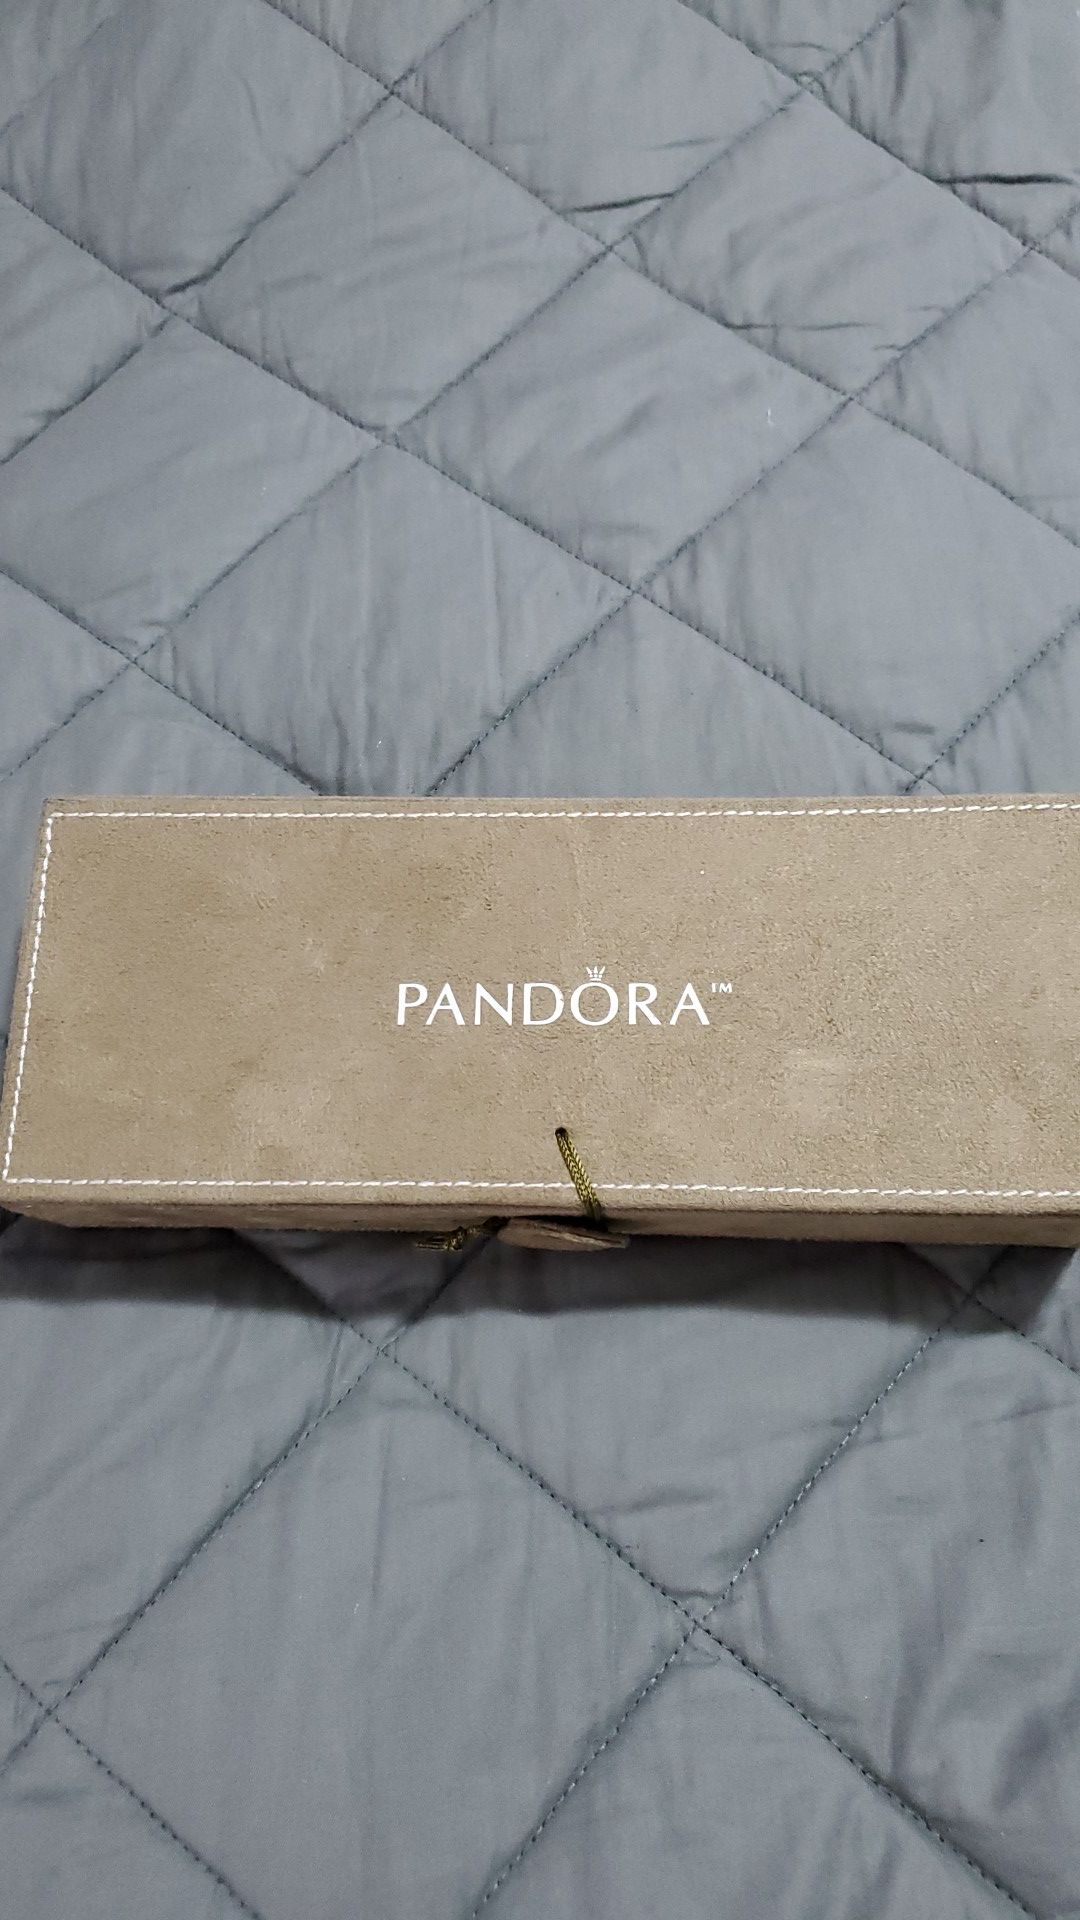 Pandora Limited Edition Taupe Suede Cream Charm Jewelry Box.